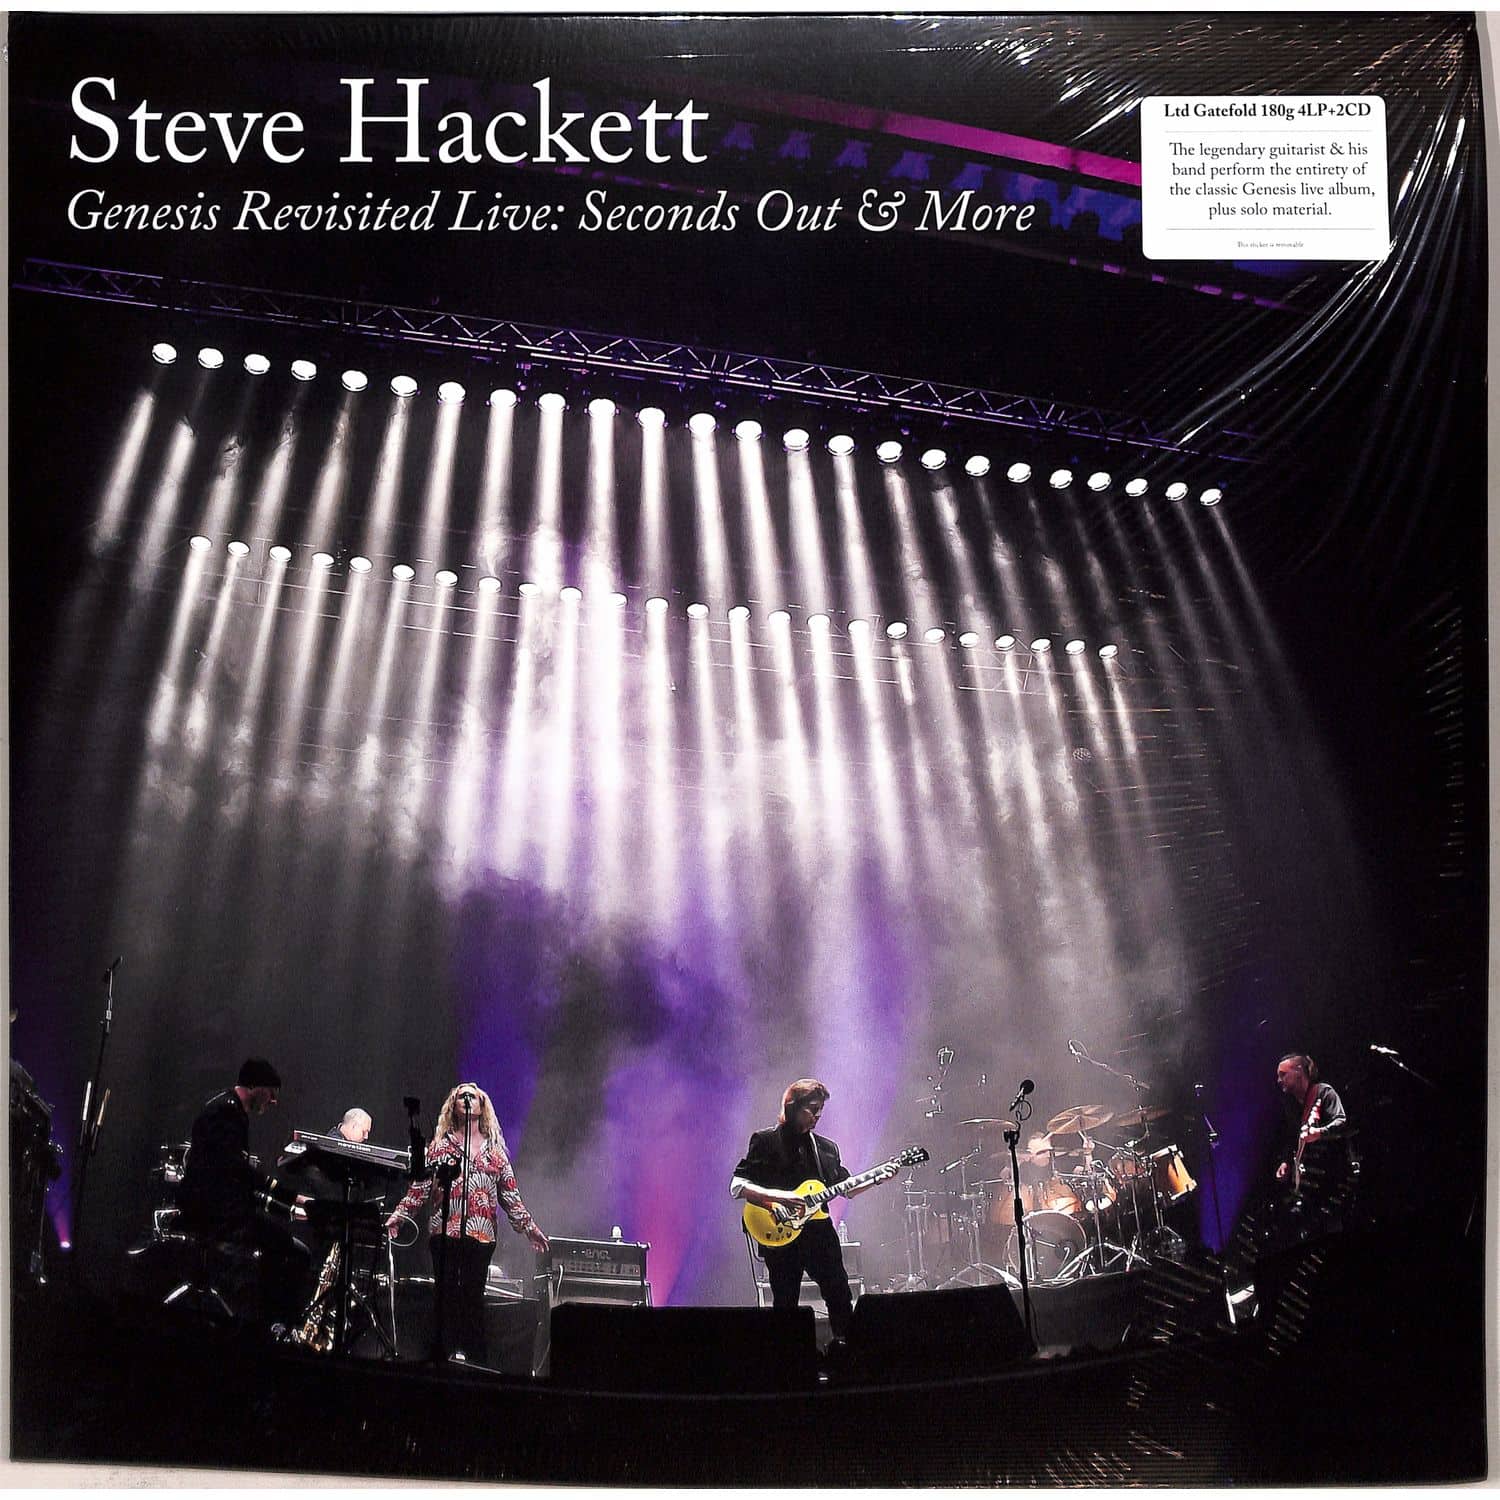 Steve Hackett - GENESIS REVISITED LIVE: SECONDS OUT & MORE 